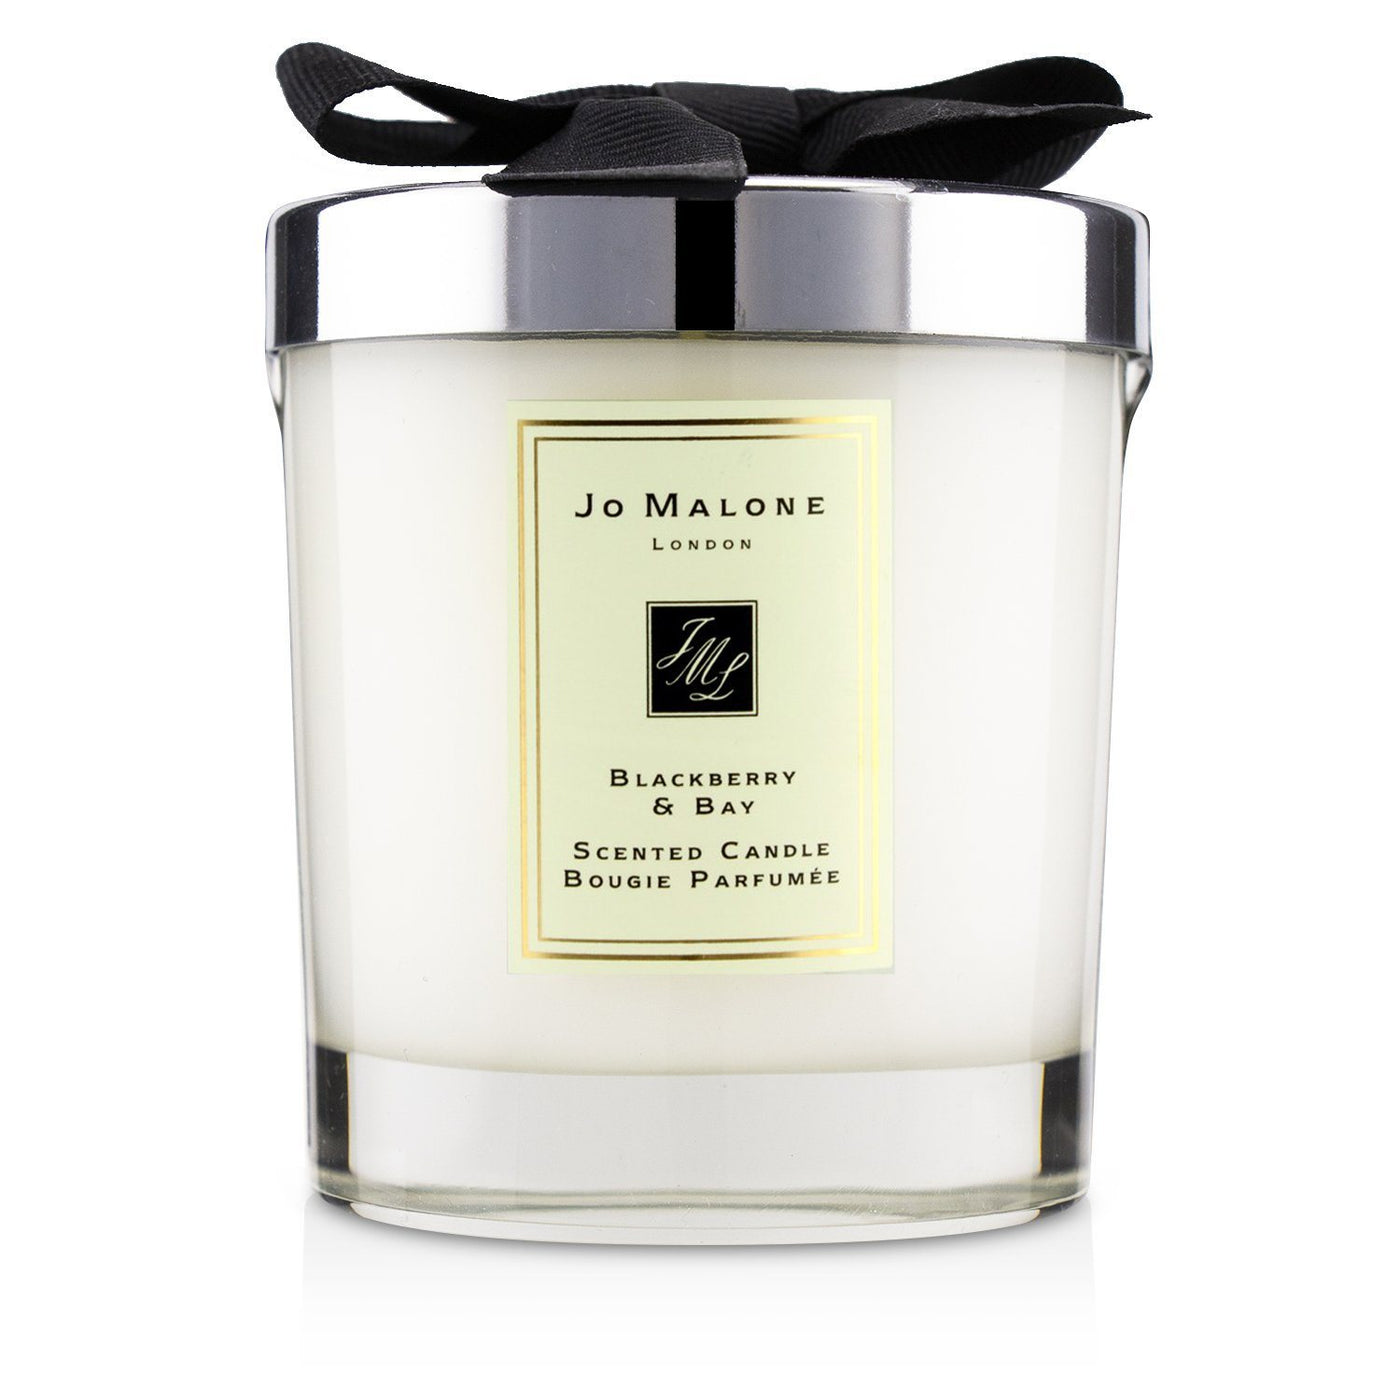 JO MALONE - Blackberry & Bay Scented Candle L32W 200g (2.5 inch)